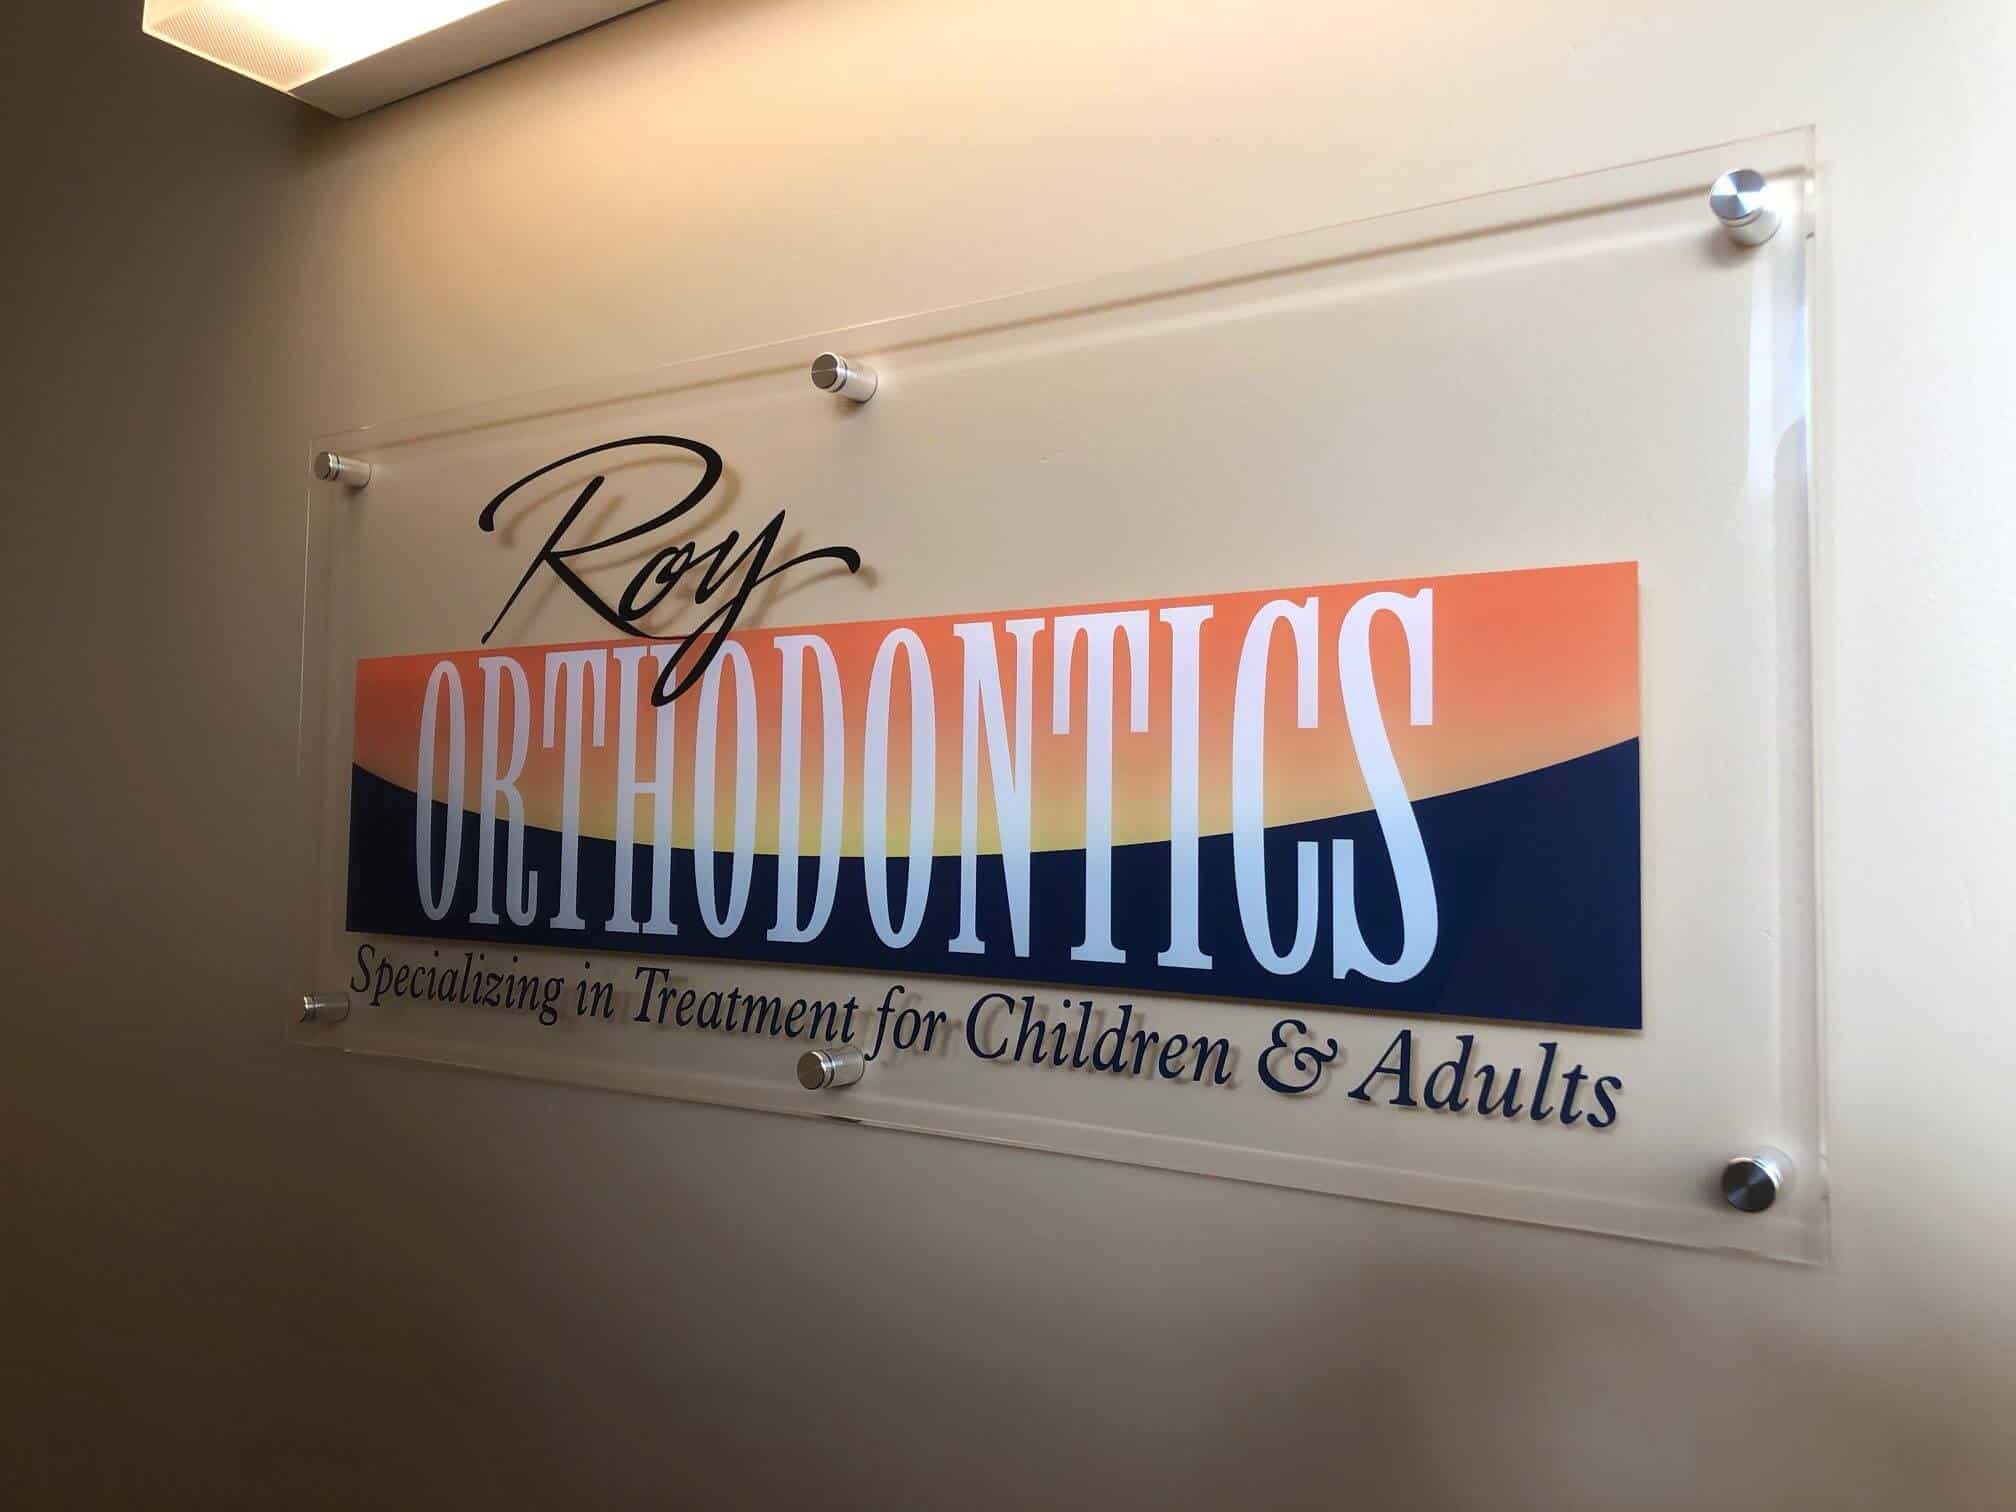 Stand-off Interior acrylic lobby sign for Roy Orthodontics